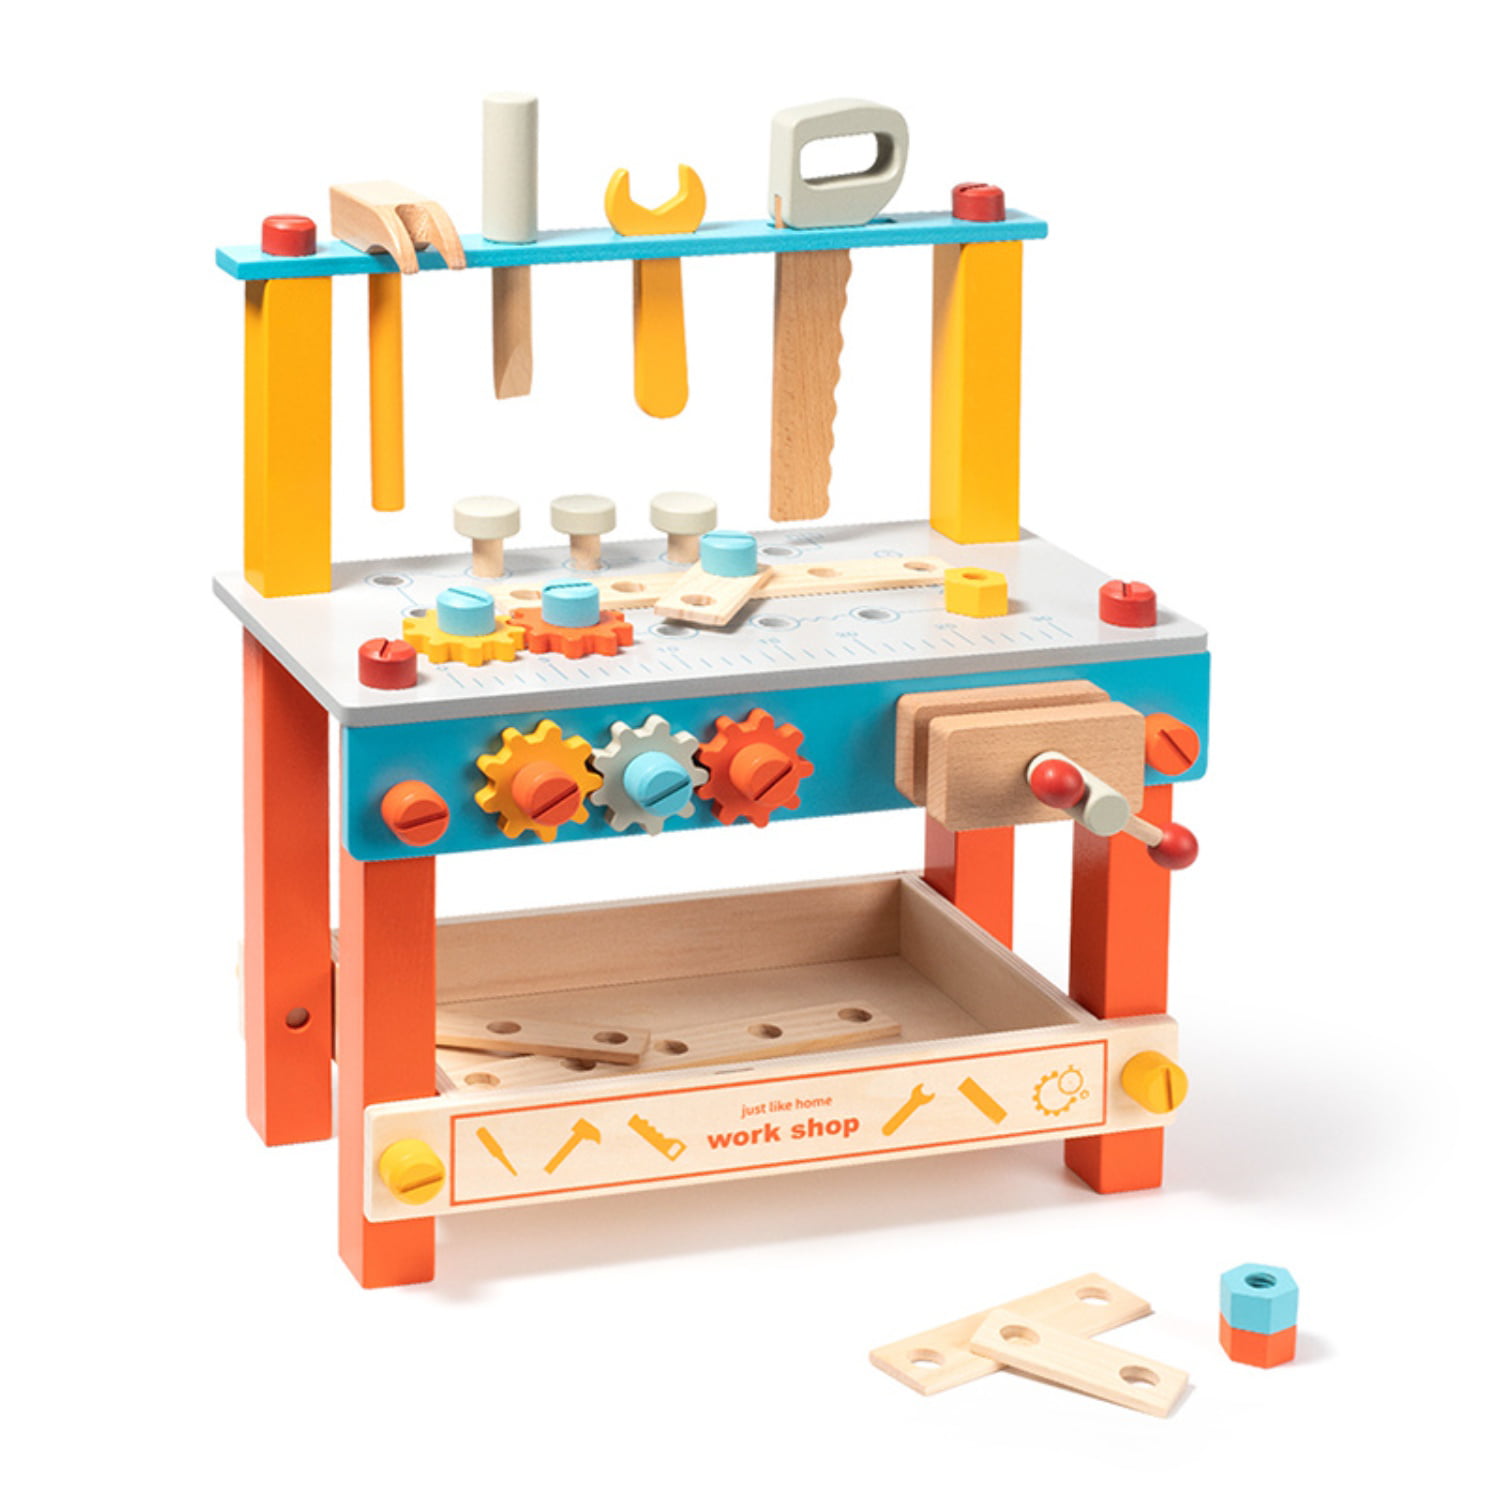 ROBOTIME Wooden Tool Bench for Kids,Toy Play Workbench Workshop with Tools  Set, Creative Wooden Toy Construction Tool Bench for Year Old Boys 